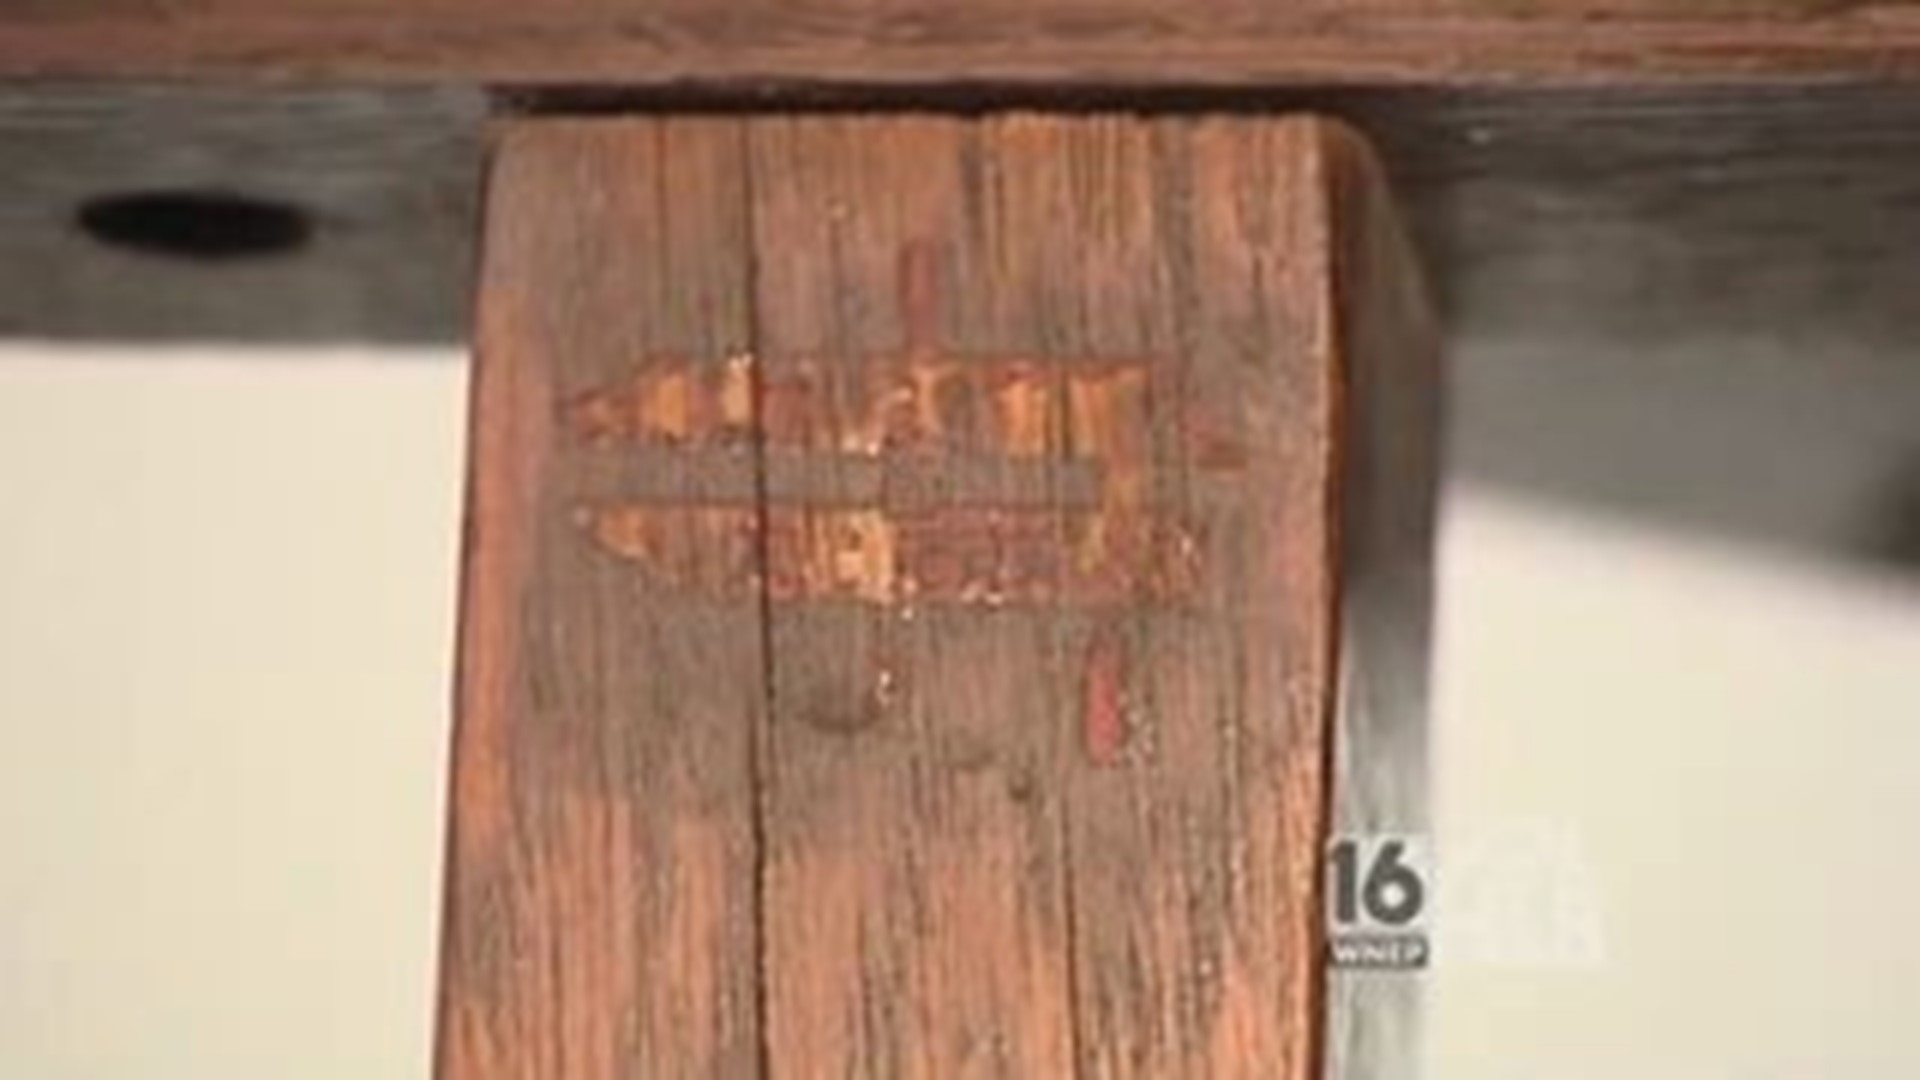 Know Before You Throw: Wooden Table